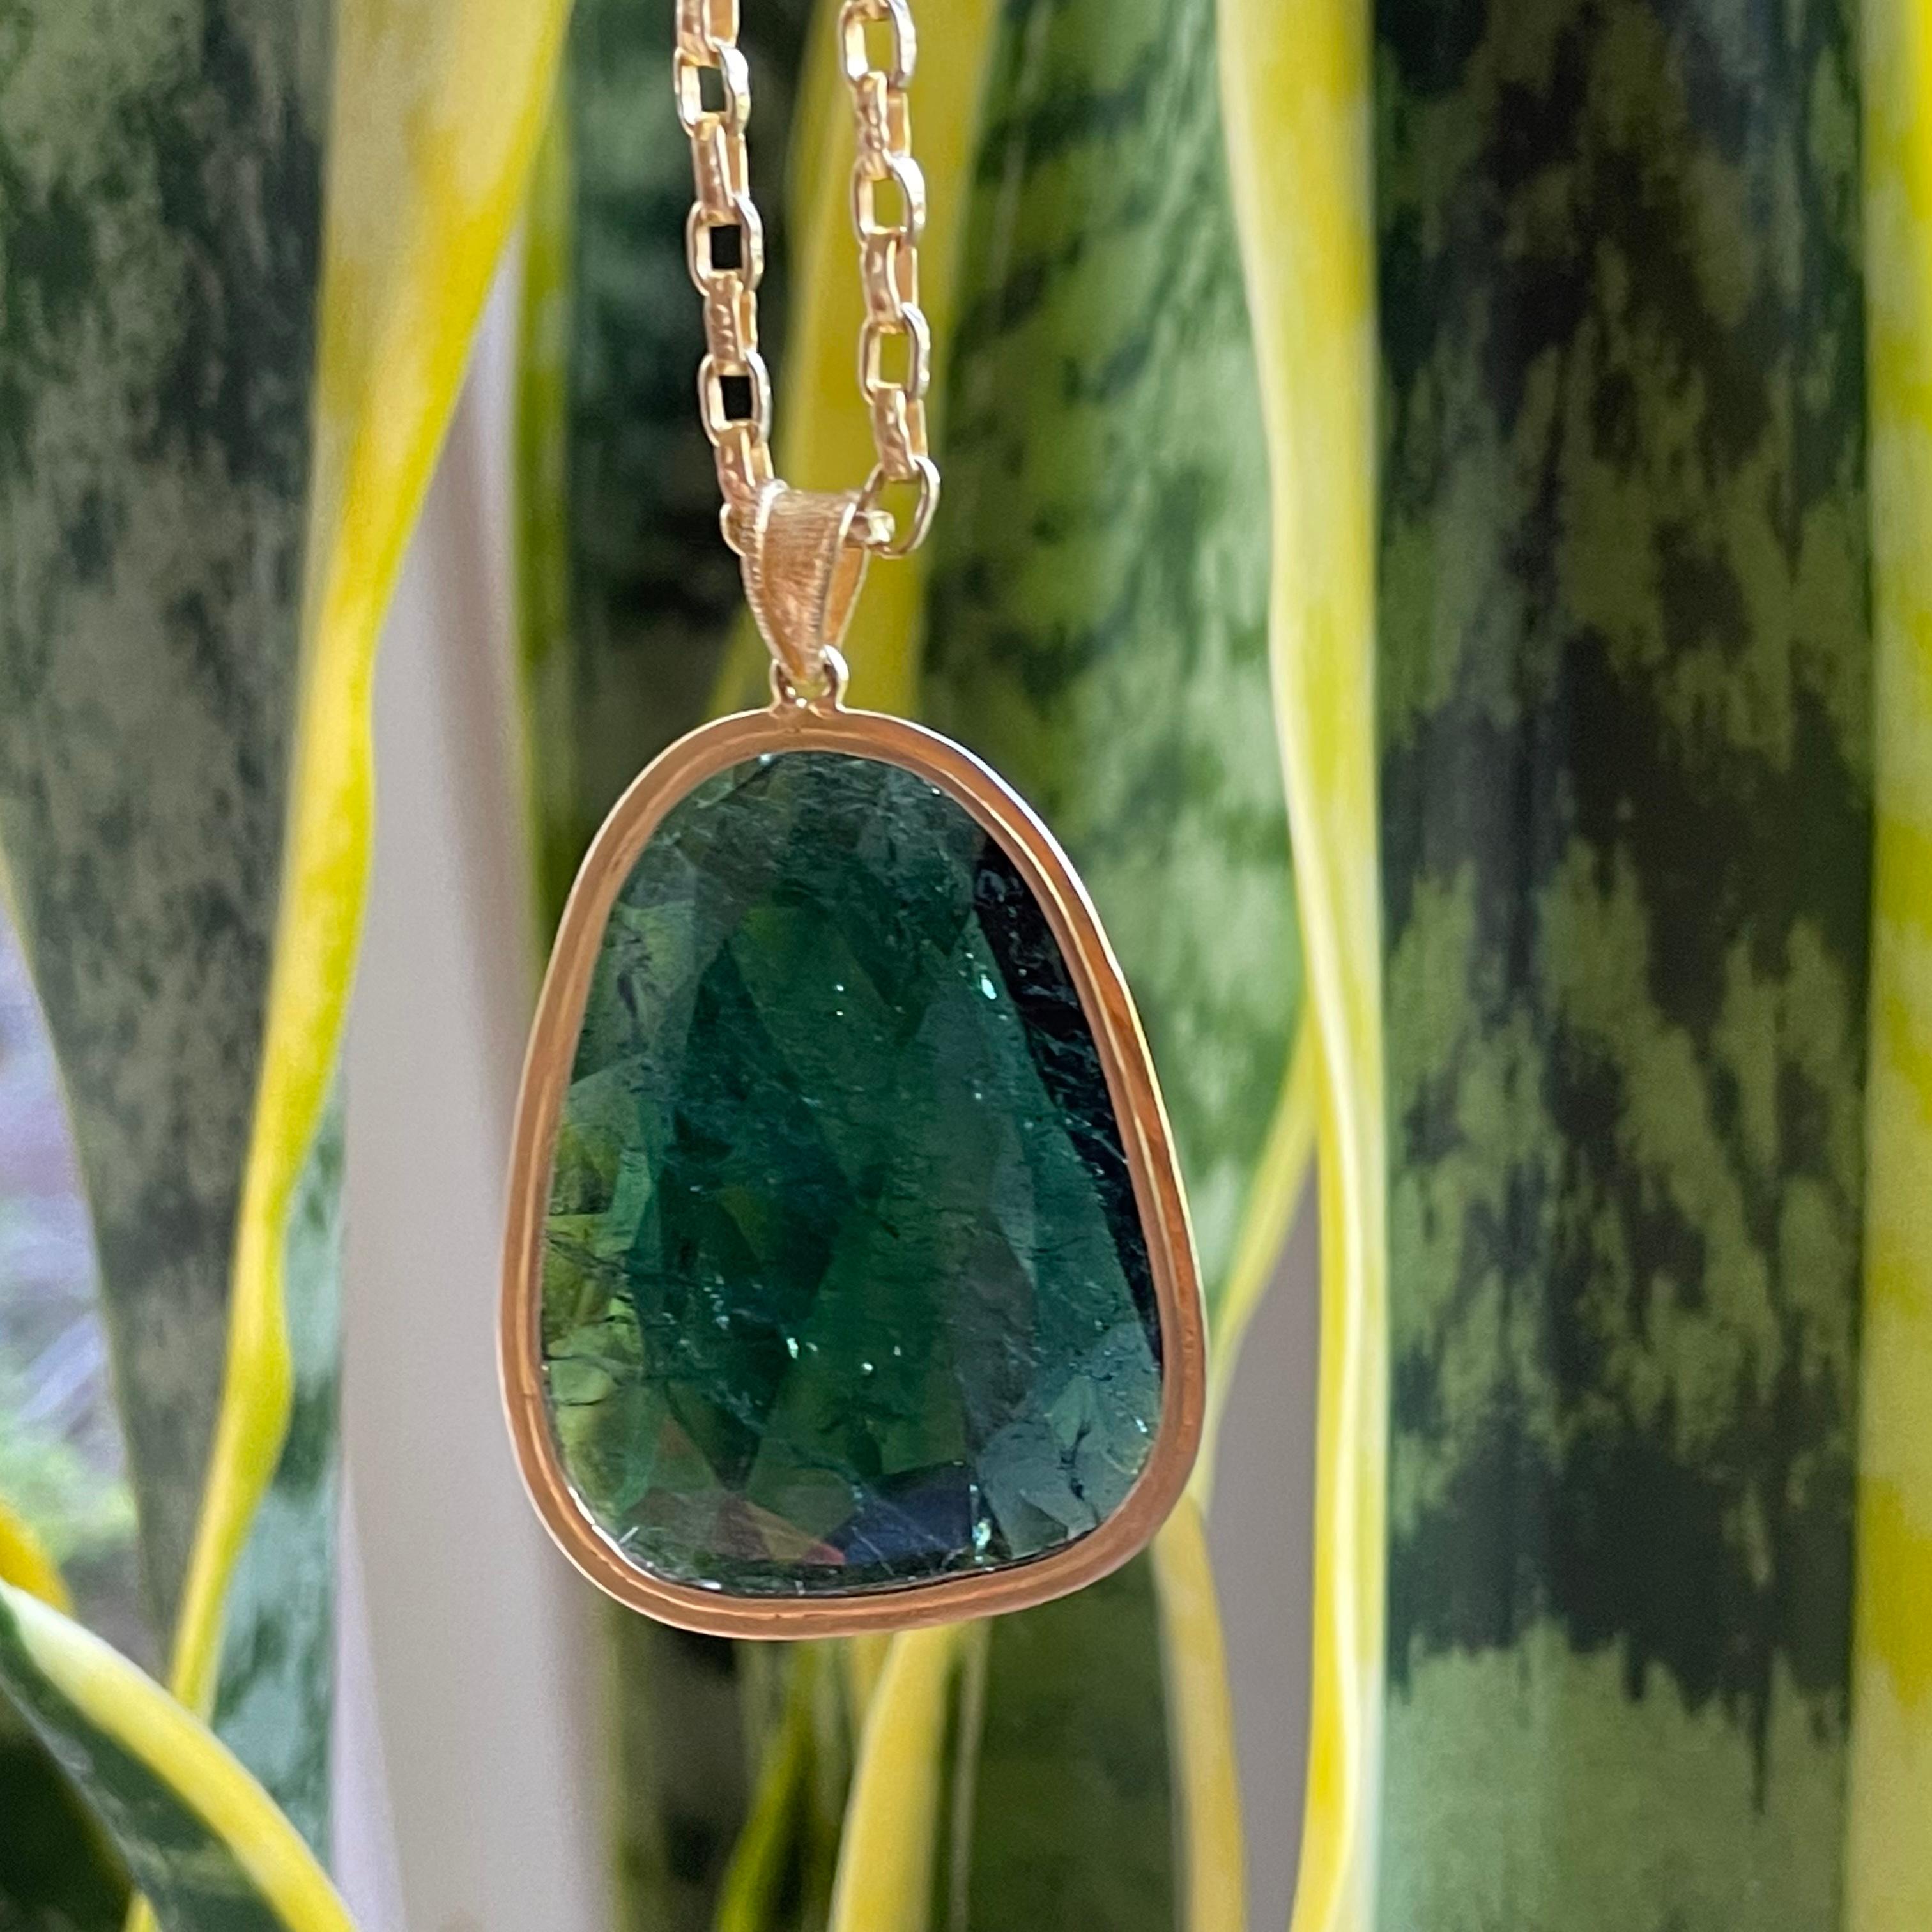 Steven Battelle 46.8 Carats Green Tourmaline Slice 18K Gold Pendant In New Condition For Sale In Soquel, CA